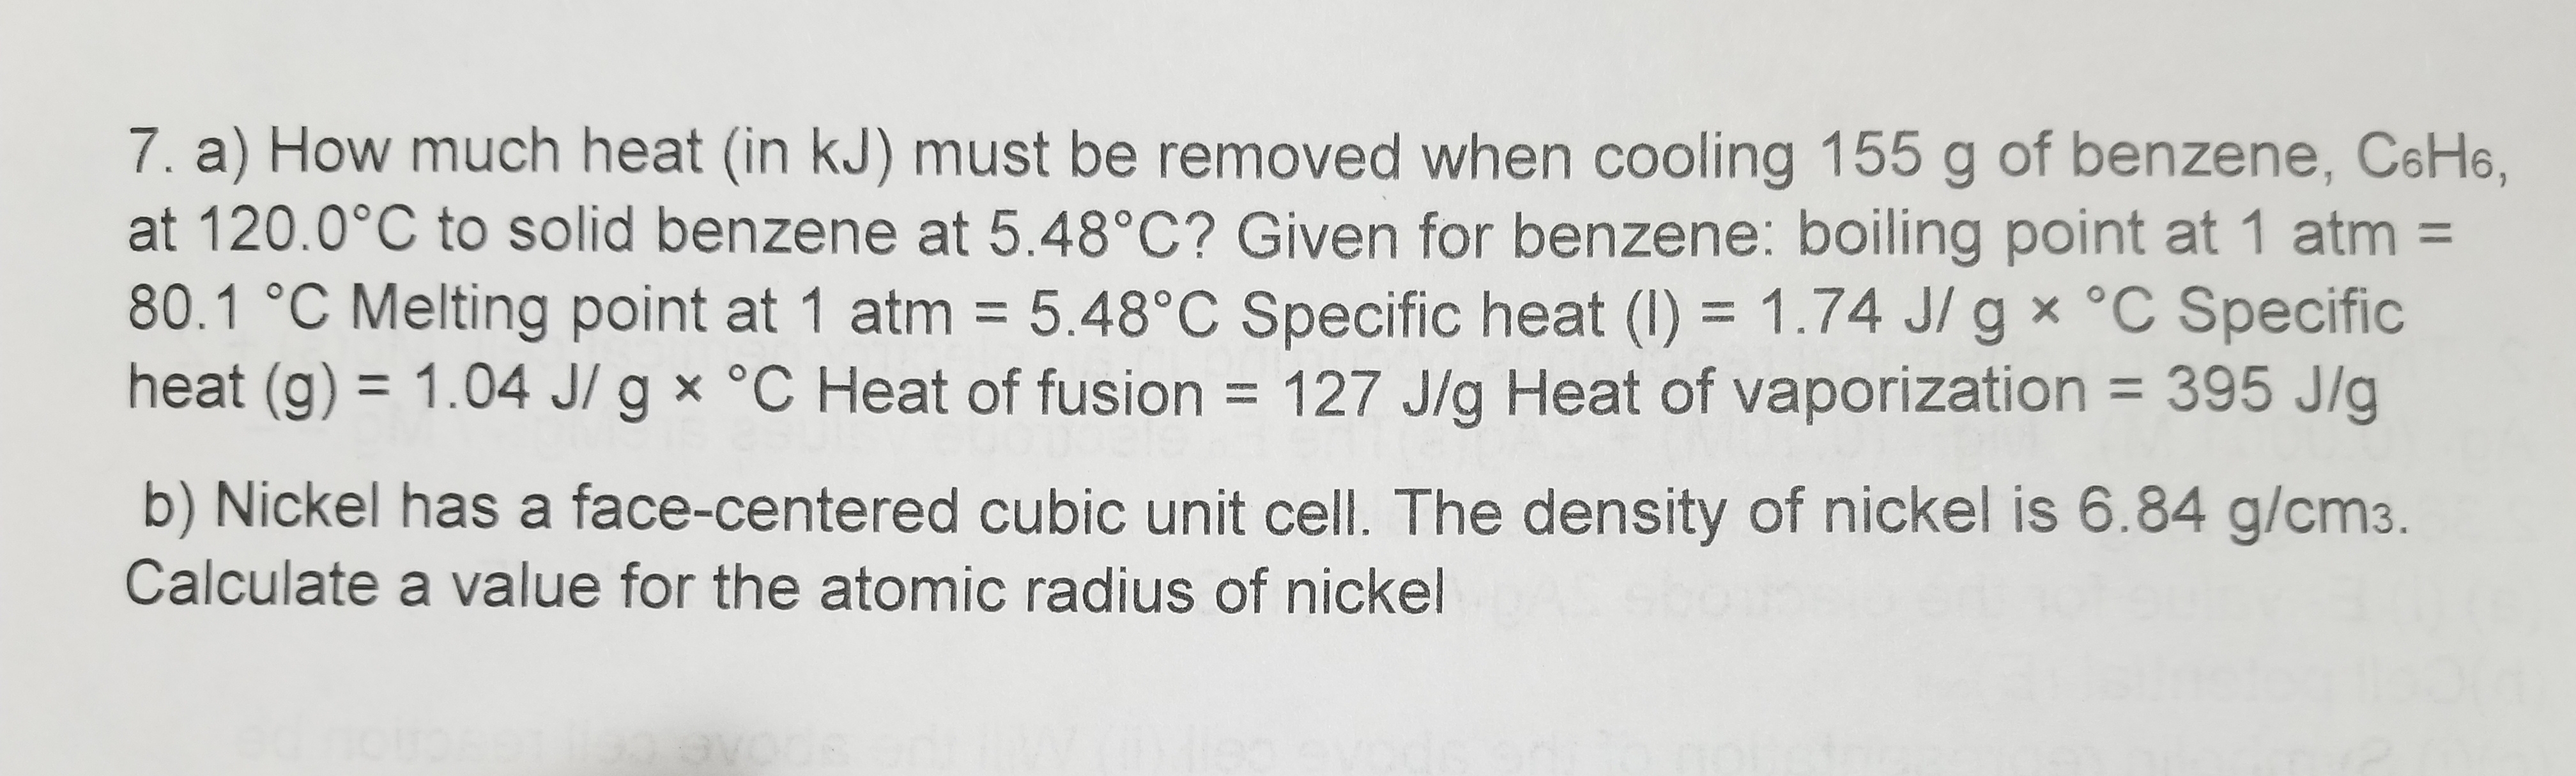 7. a) How much heat (in kJ) must be removed when cooling 155 g of benzene, C6H6,
at 120.0°C to solid benzene at 5.48°C? Given for benzene: boiling point at 1 atm =
80.1 °C Melting point at 1 atm = 5.48°C Specific heat (I) = 1.74 J/ g x °C Specific
heat (g) = 1.04 J/ g × °C Heat of fusion = 127 J/g Heat of vaporization = 395 J/g
%3D
%3D
b) Nickel has a face-centered cubic unit cell. The density of nickel is 6.84 g/cm3.
Calculate a value for the atomic radius of nickel
